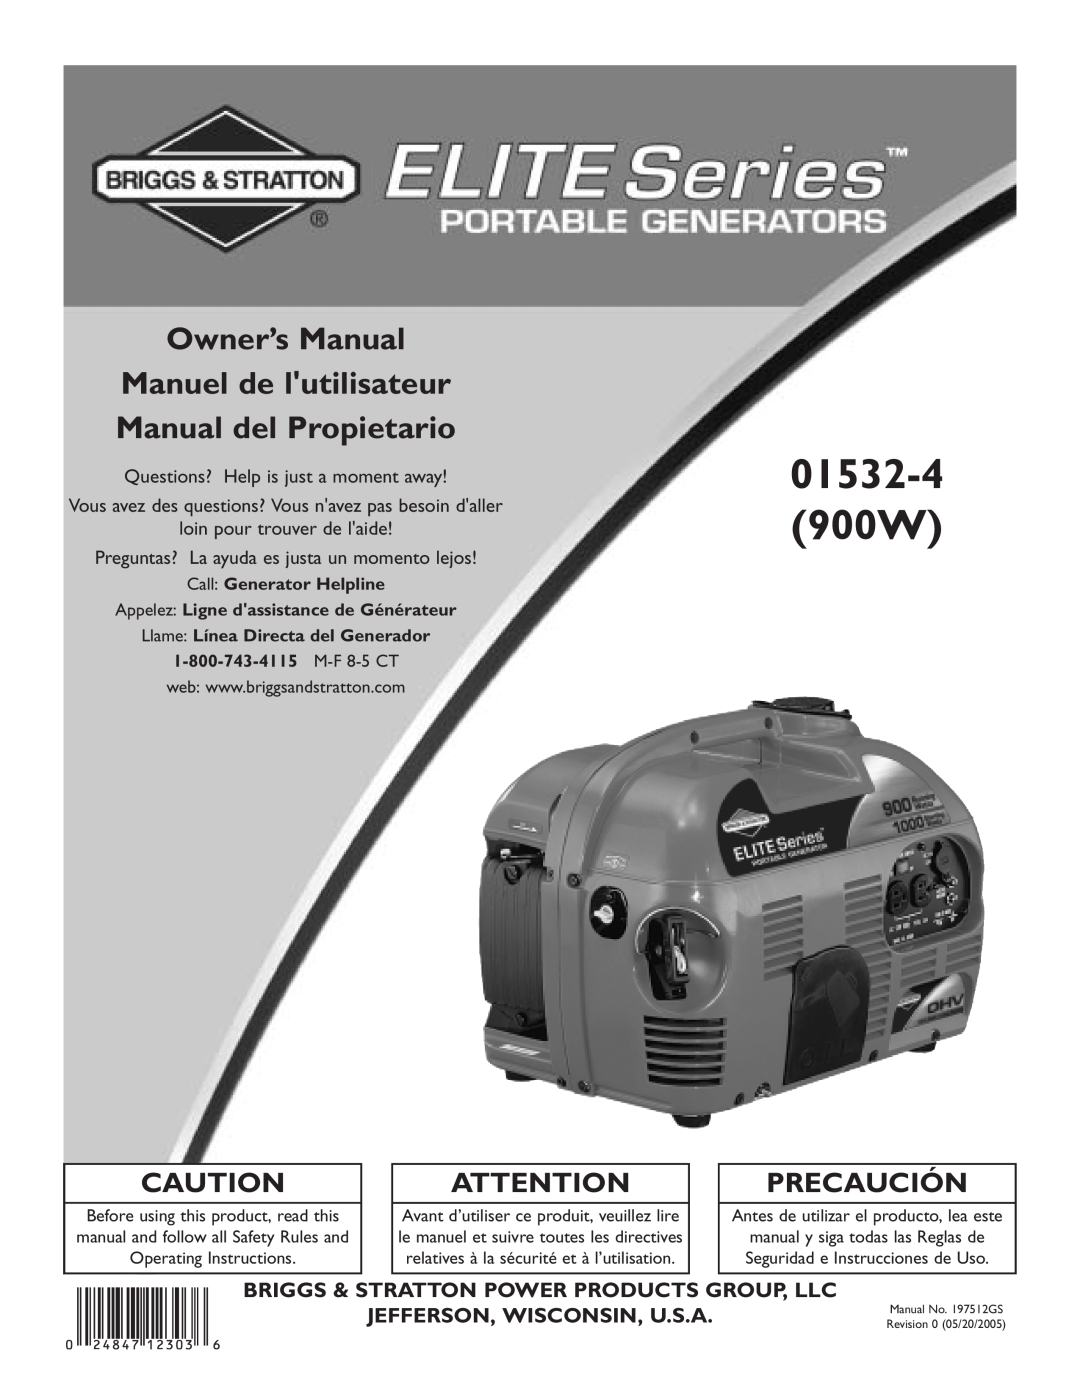 Briggs & Stratton 01532-4 owner manual Briggs & Stratton Power Products Group, Llc, Jefferson, Wisconsin, U.S.A 